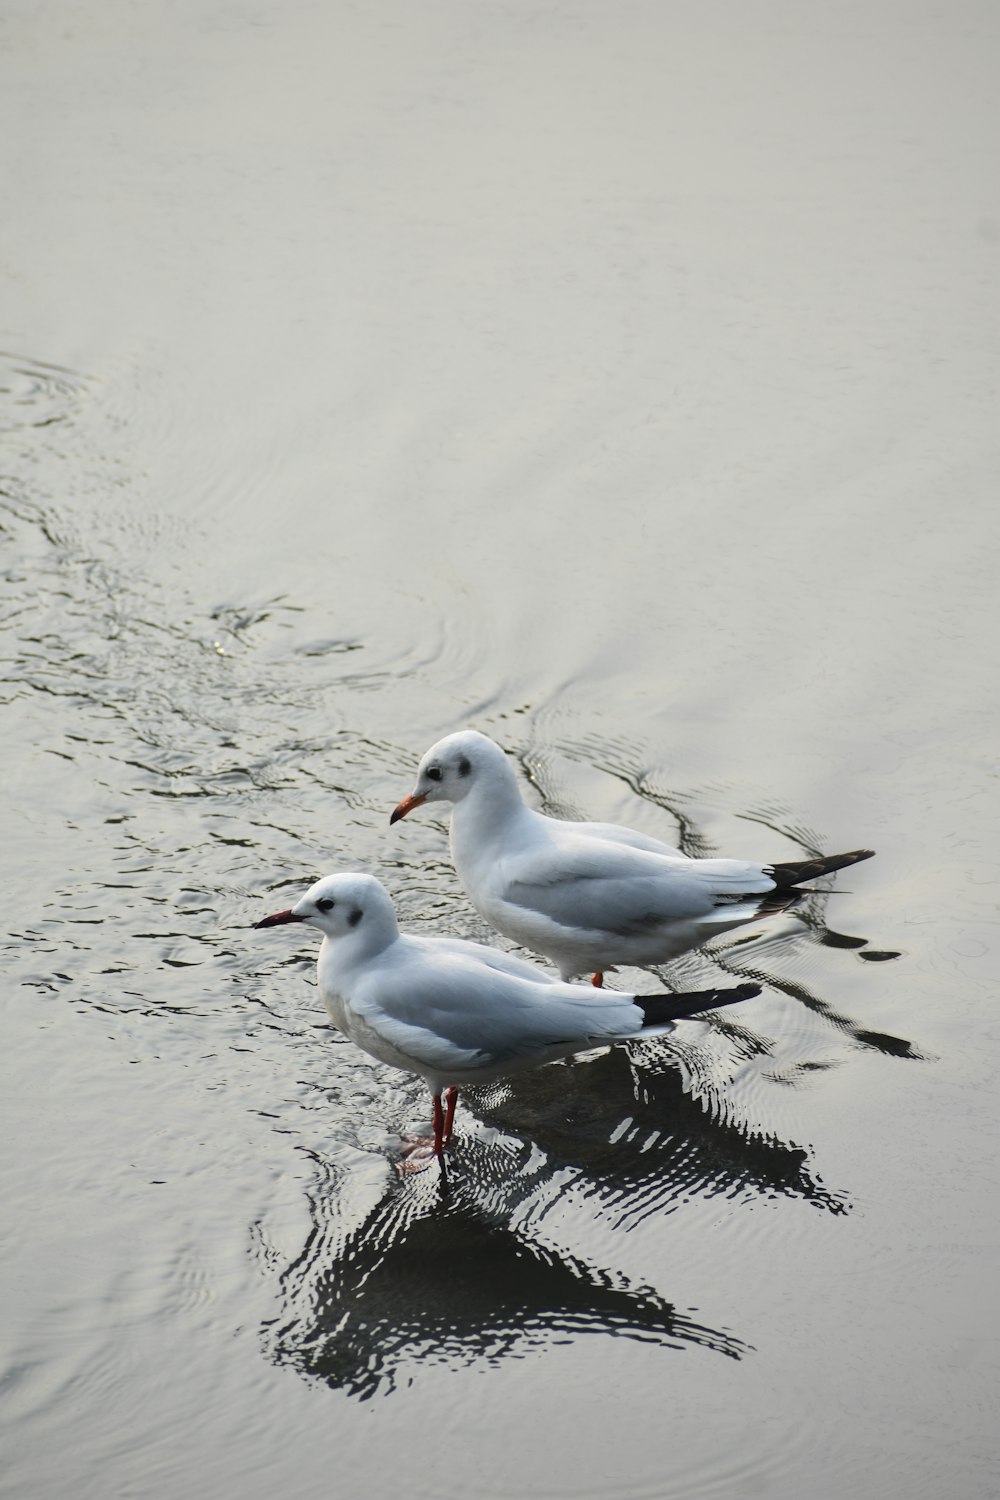 two seagulls are standing in the water